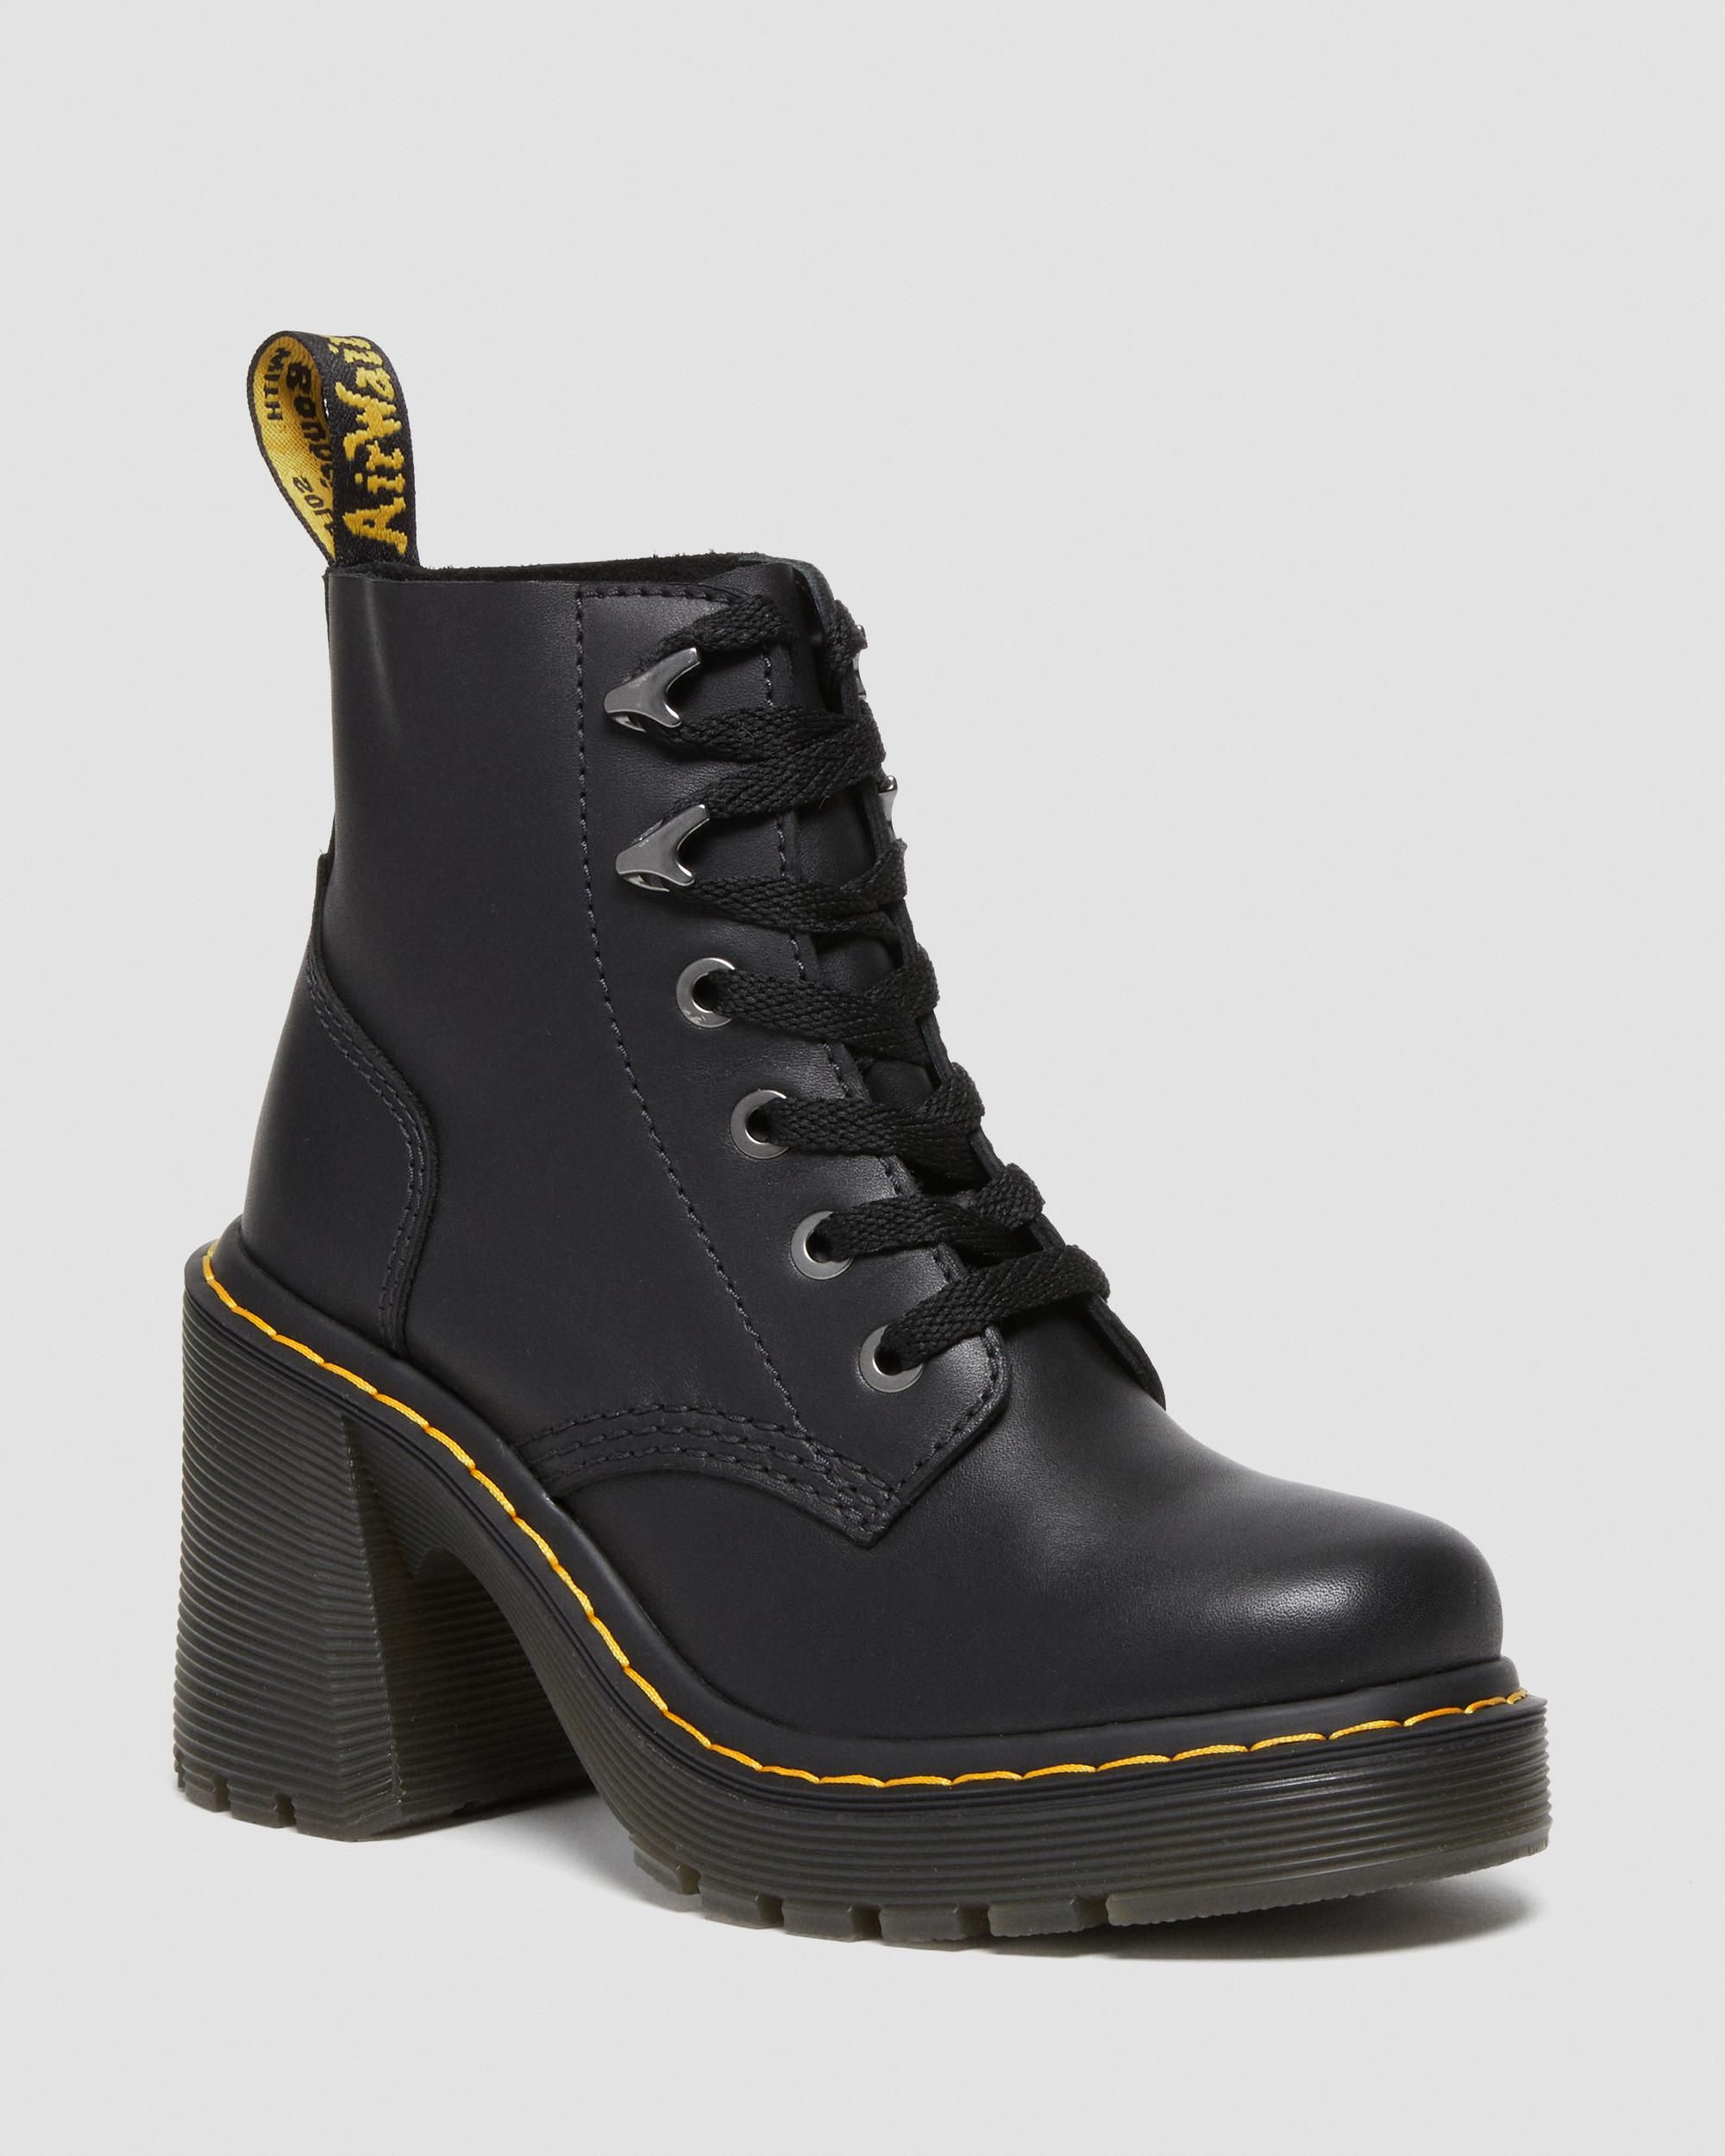 Jesy Sendal Leather Lace Up Flared Heel Boots | Dr. Martens